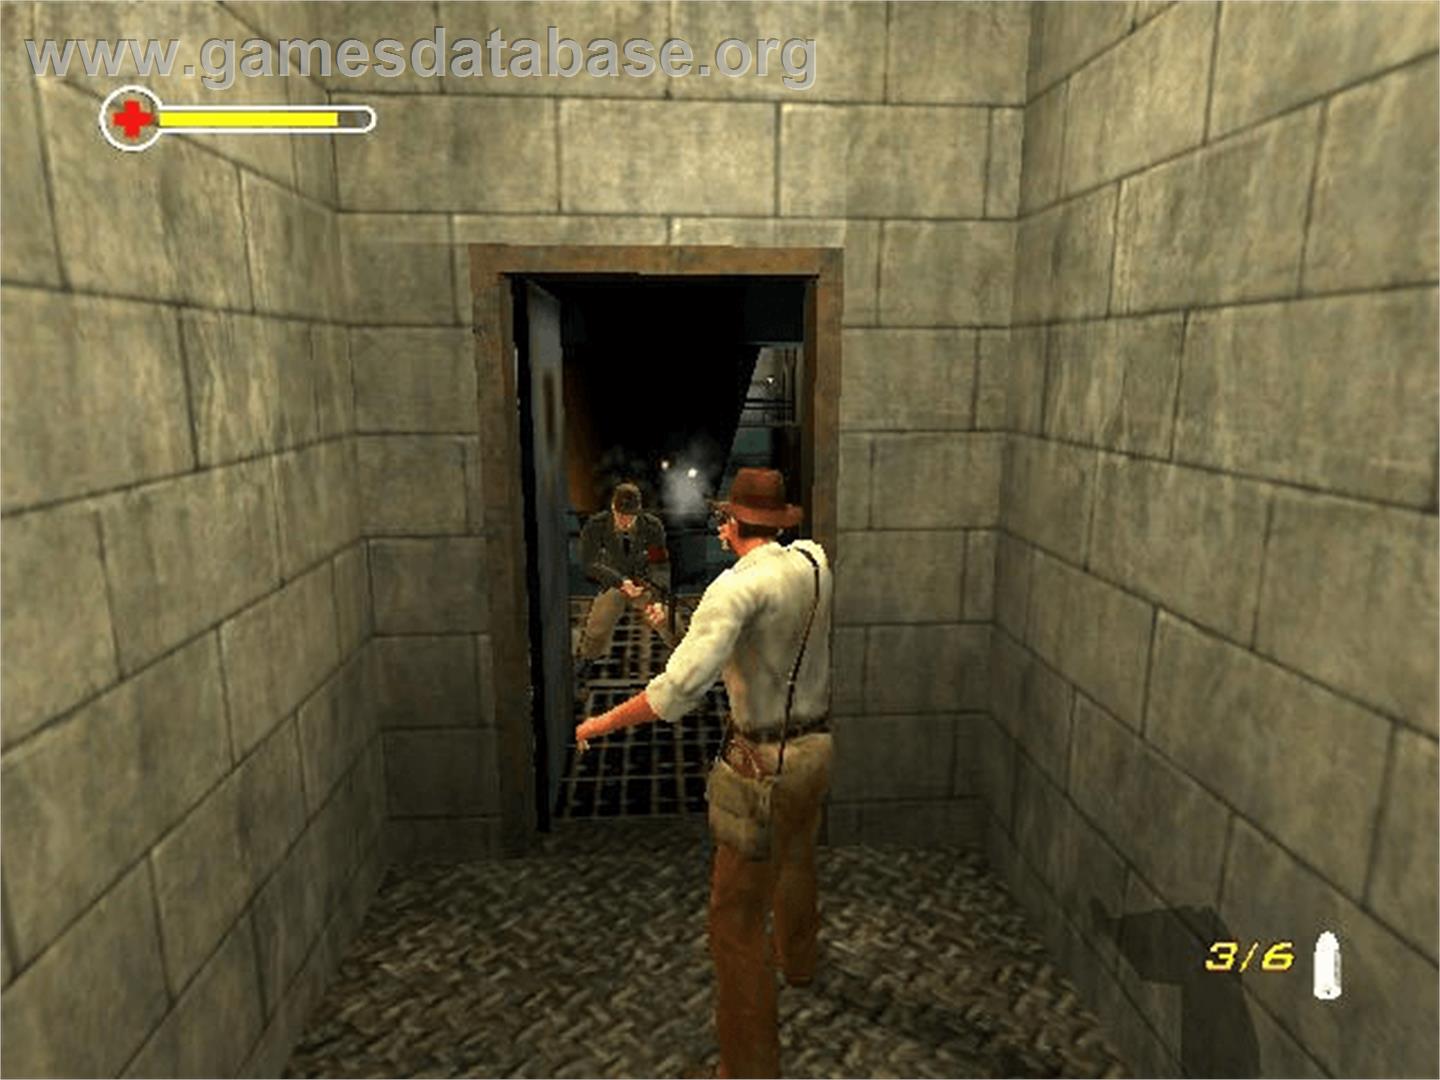 Indiana Jones and the Emperor's Tomb - Microsoft Xbox - Artwork - In Game